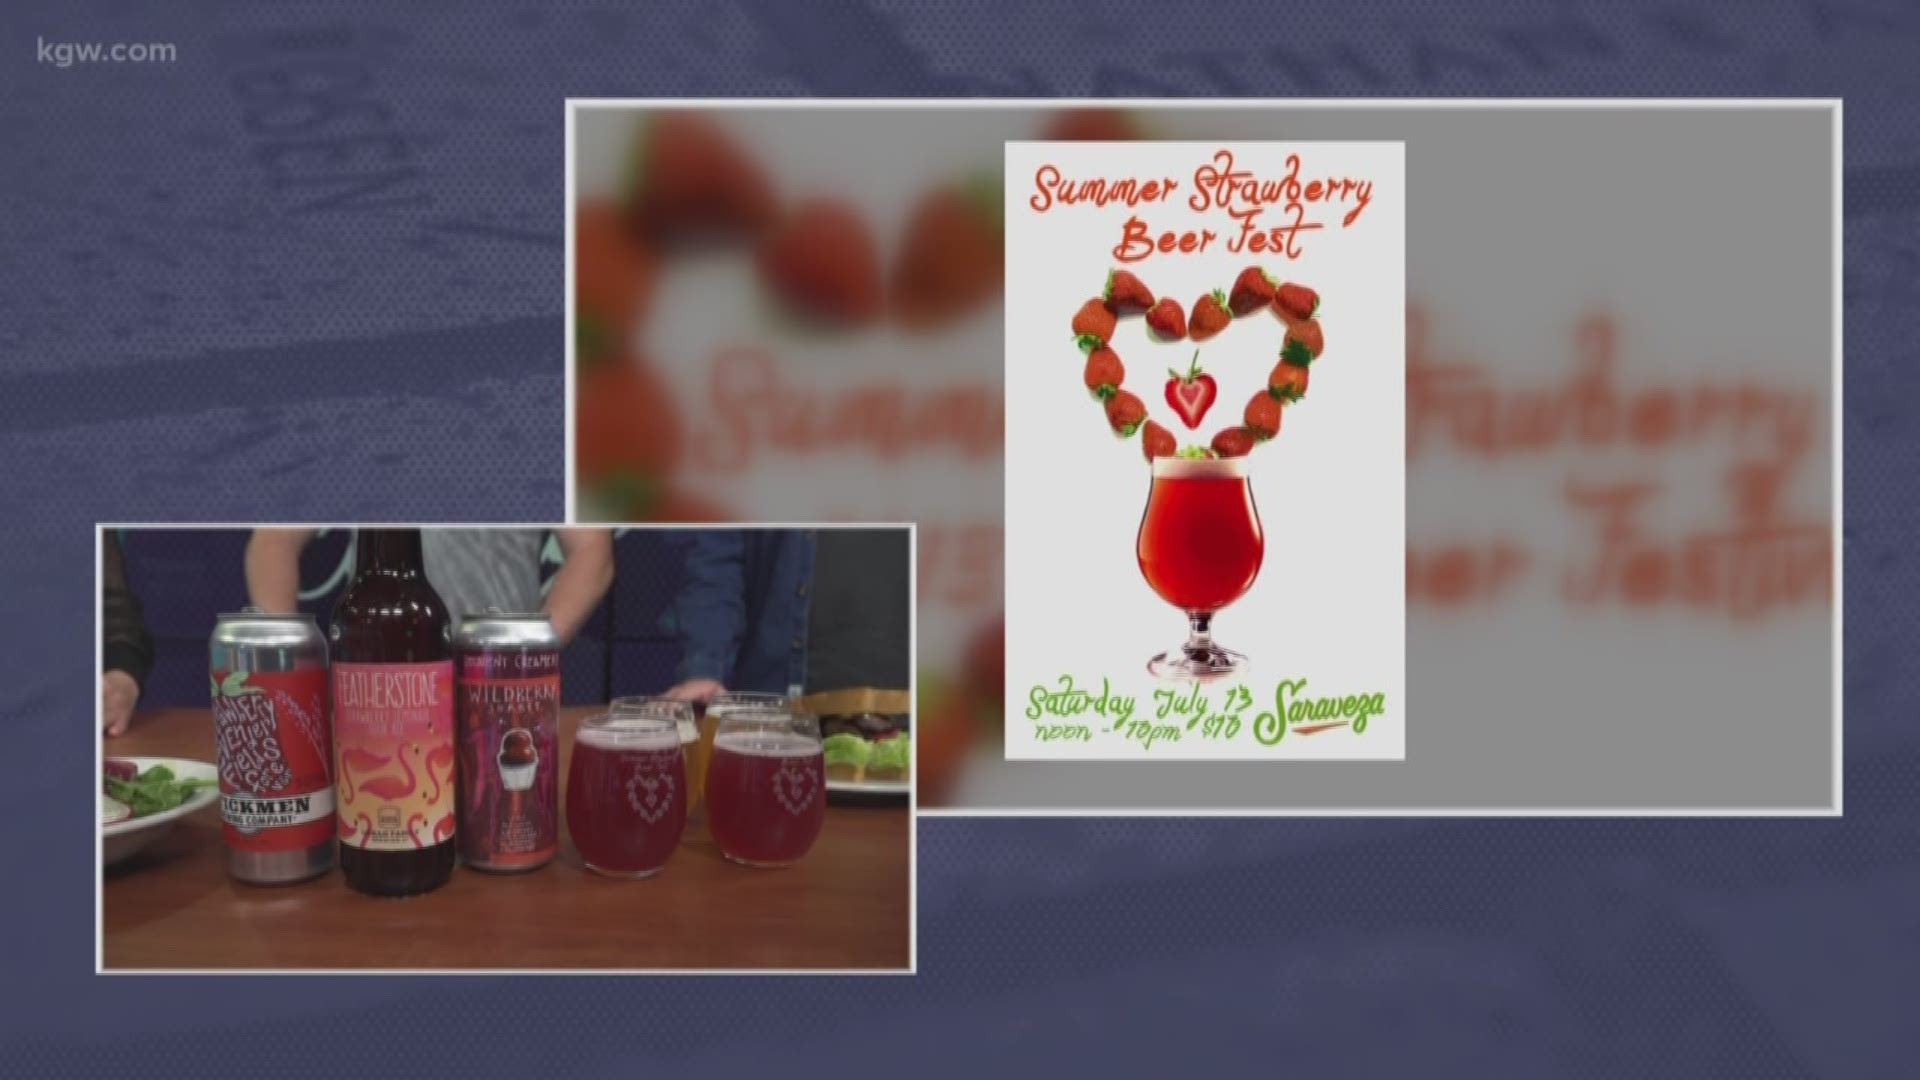 The 2nd annual Summer Strawberry Beer Festival is this Saturday in North Portland. It features 20+ strawberry beers and ciders.
#TonightwithCassidy